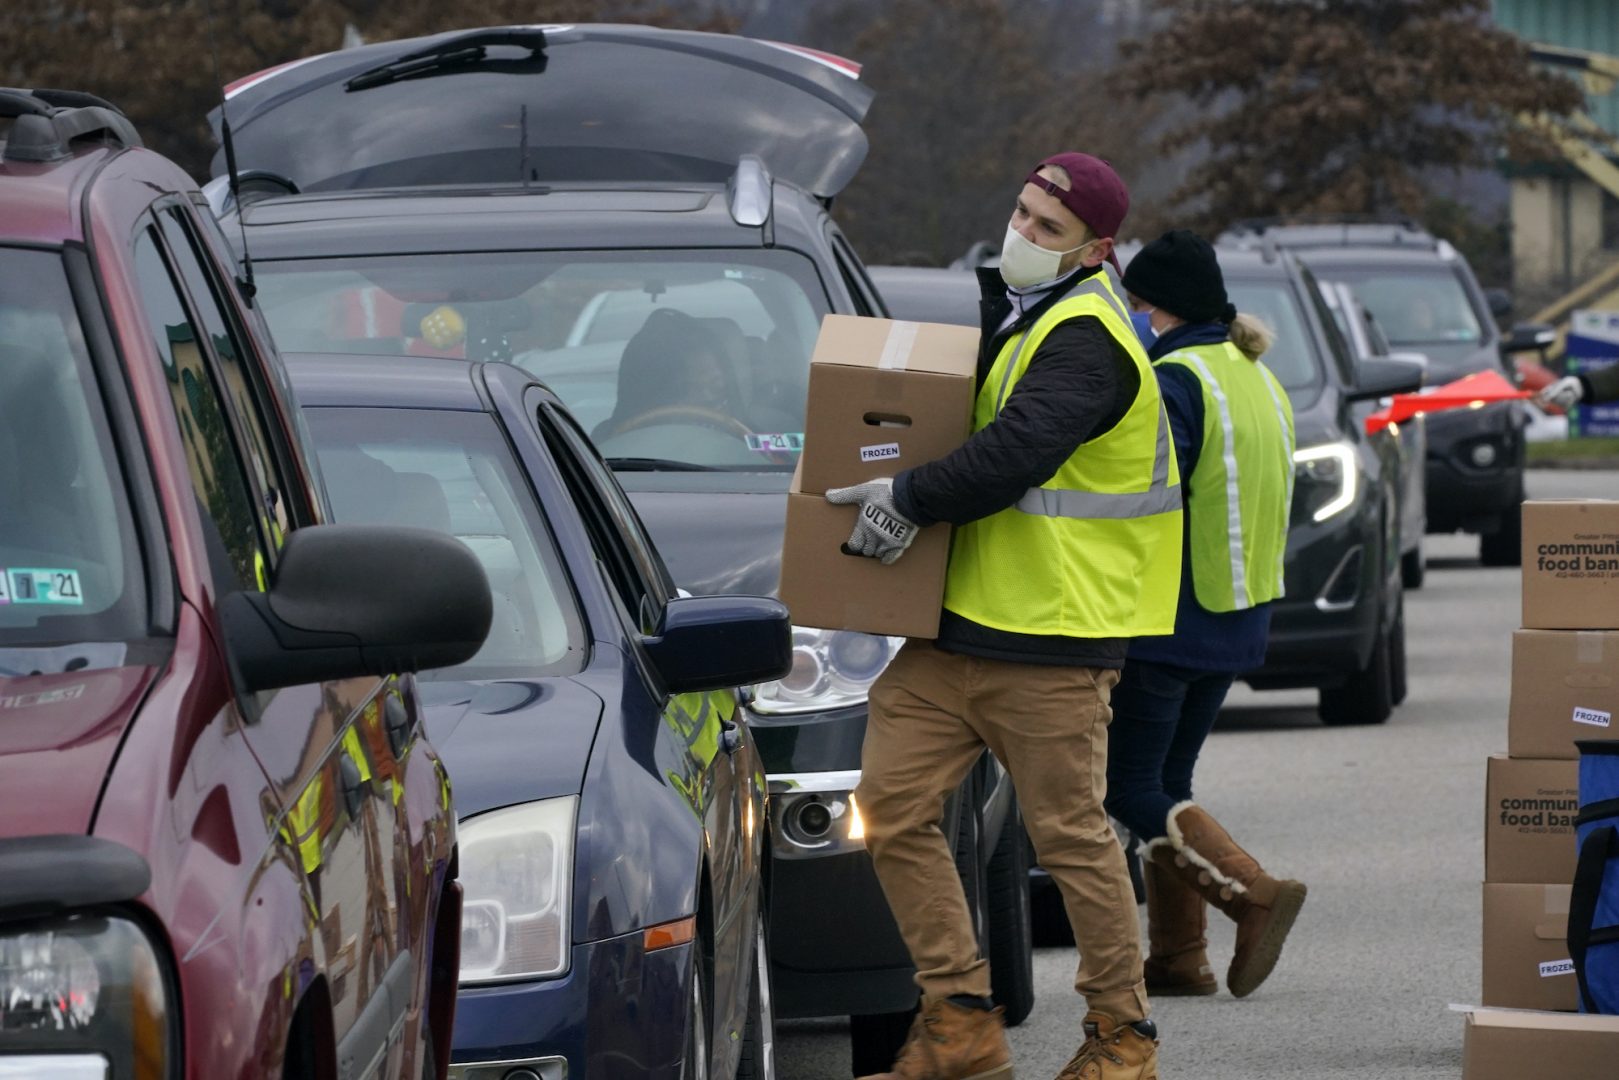 Volunteers load boxes of food into a car during a Greater Pittsburgh Community Food bank drive-up food distribution in Duquesne, Pa., Monday, Nov. 23, 2020.